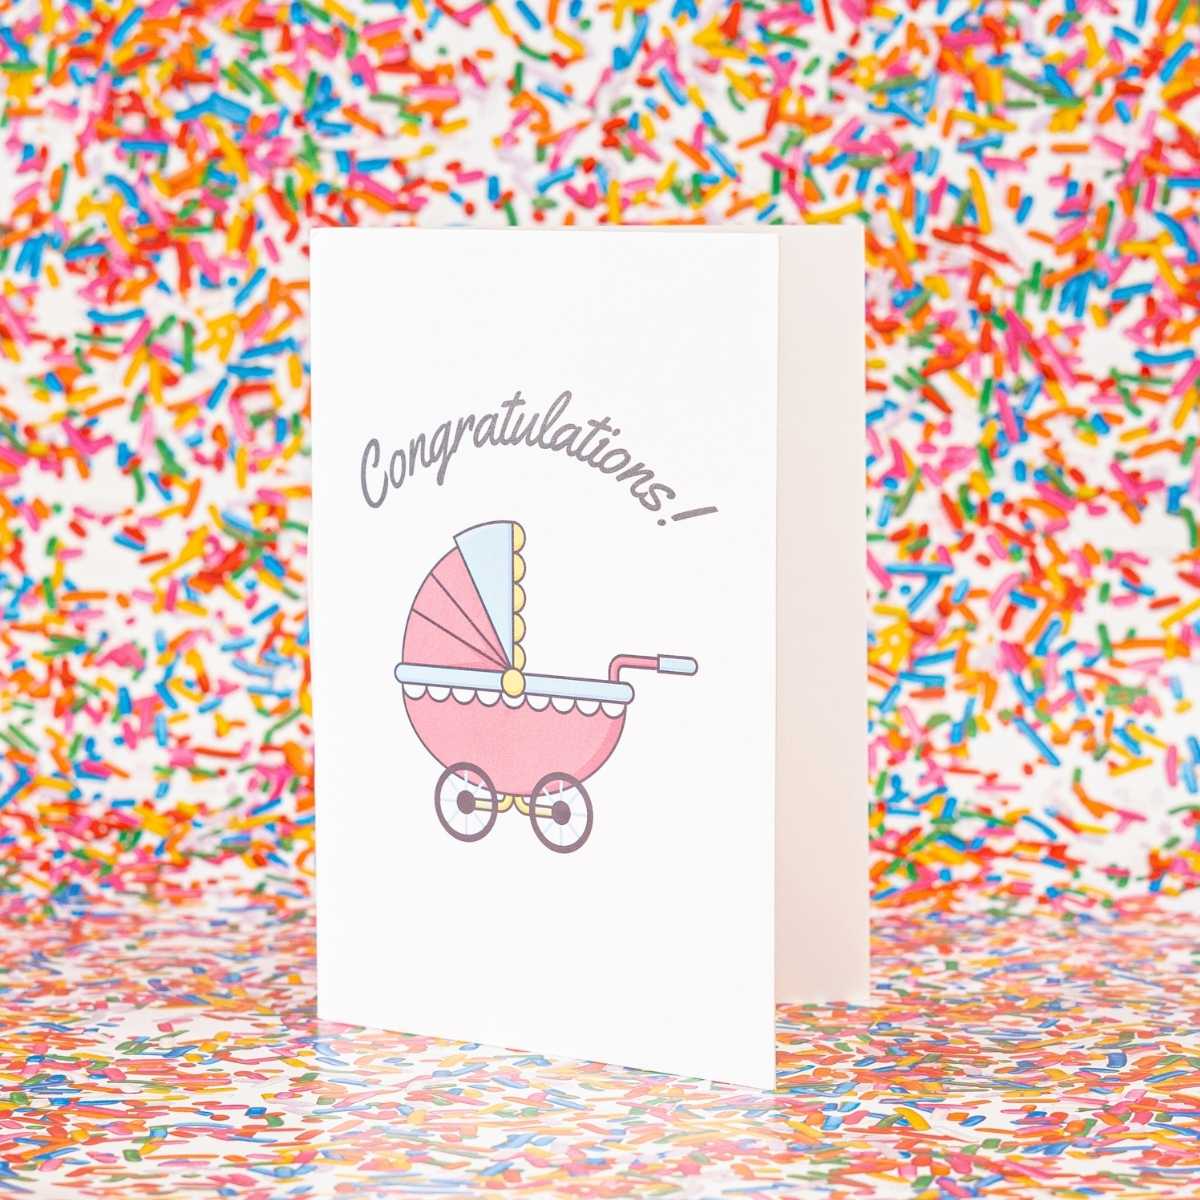 Congratulations on the New Baby! - Never-Ending Crying Baby Prank Greeting Card by DickAtYourDoor